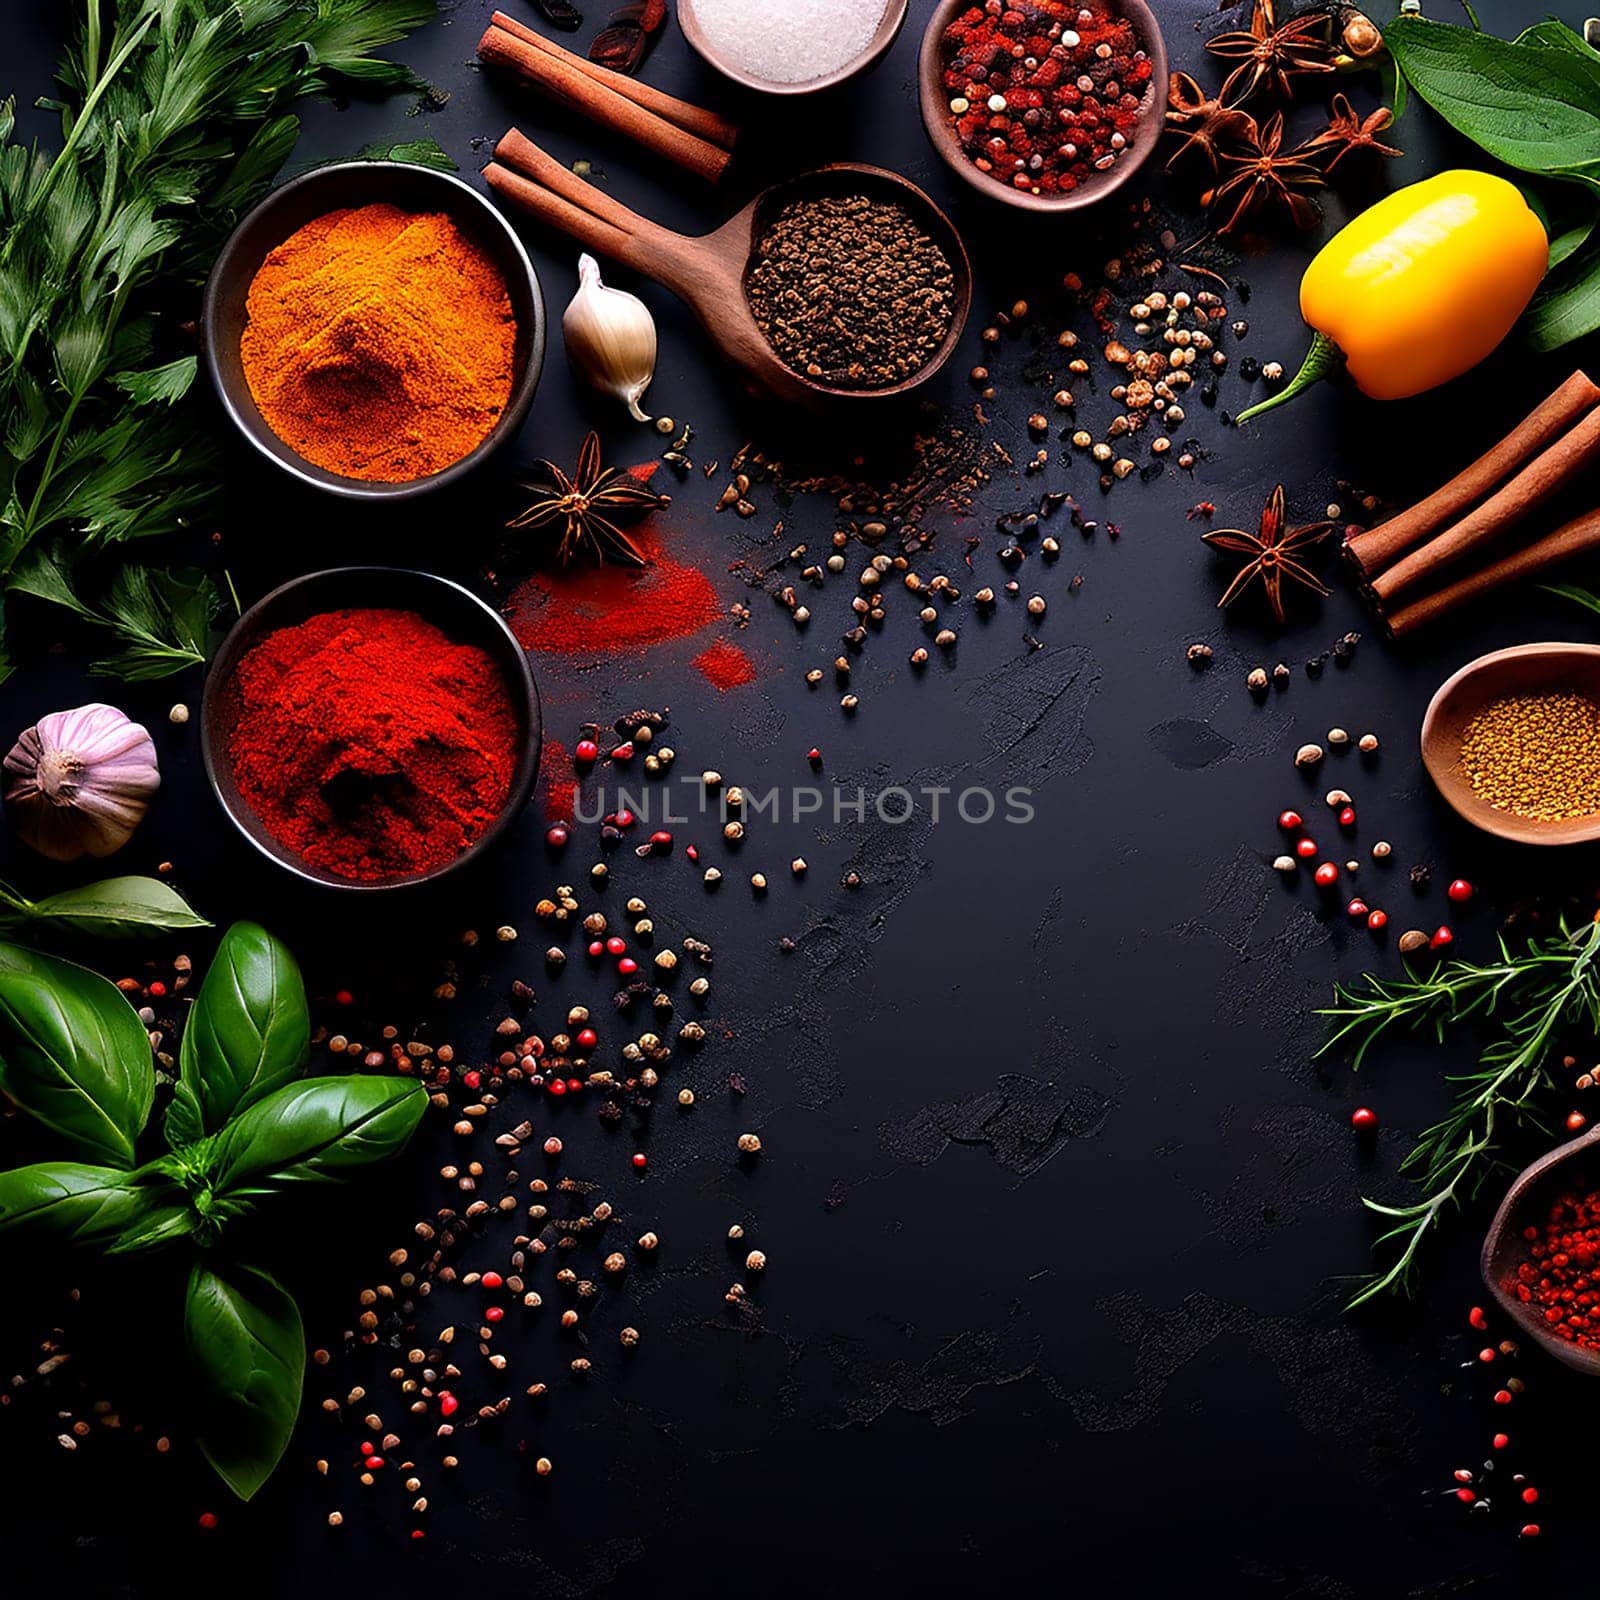 Gourmet Seasonings: Colorful Herbs and Spices for Culinary Creations by Petrichor